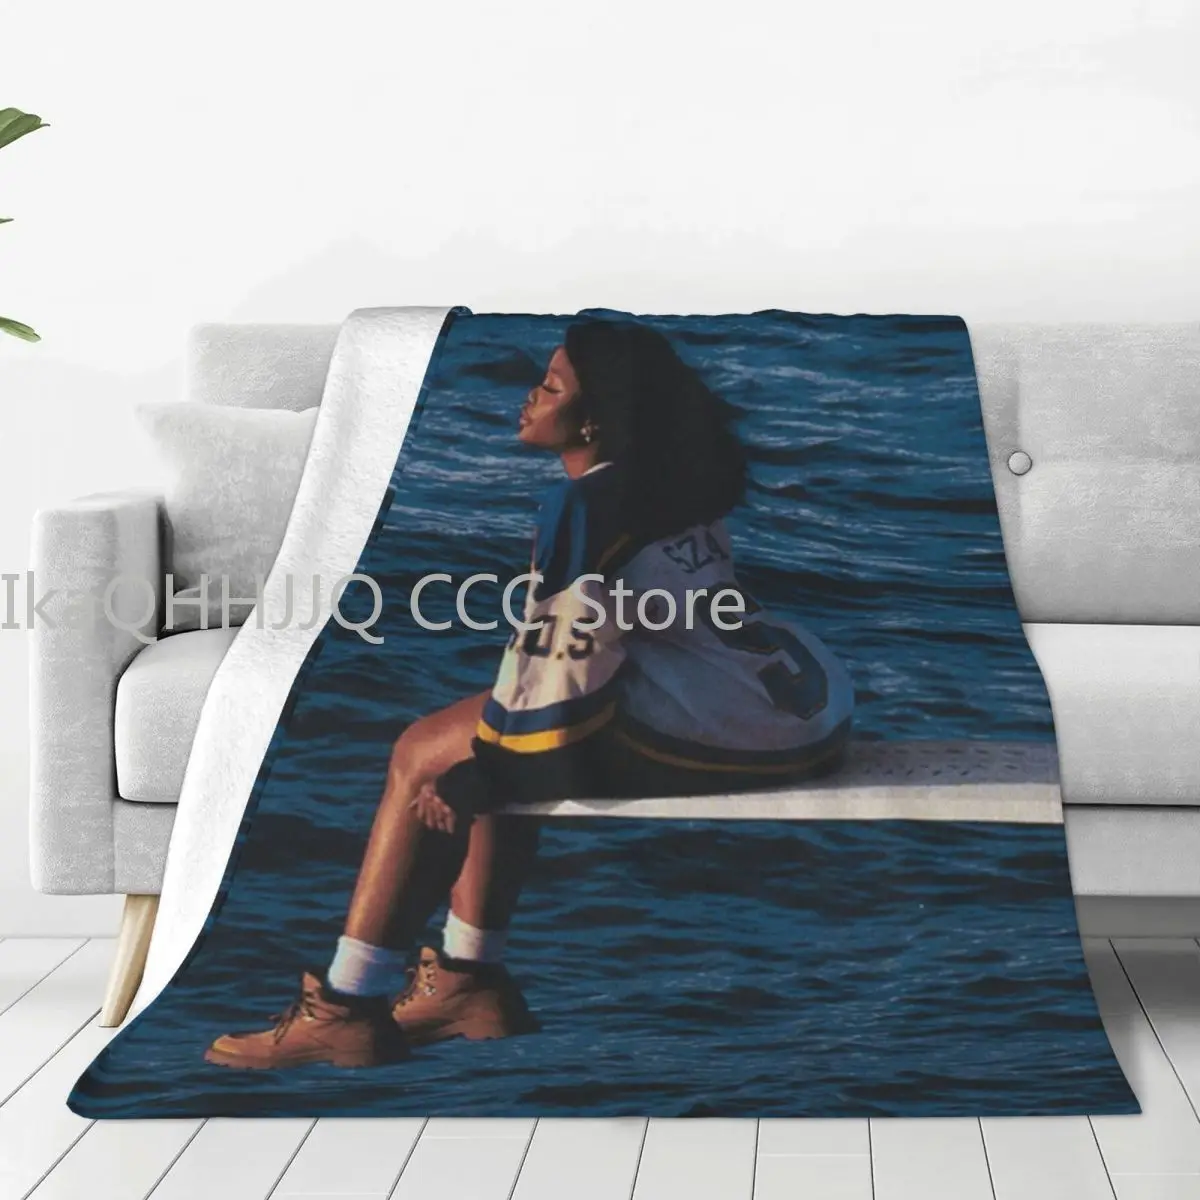 

Warm Soft Blankets Travelling Sza Hip Hop Music Throw Blanket Ocean Flannel Bedspread Bedroom Aesthetic Sofa Bed Cover